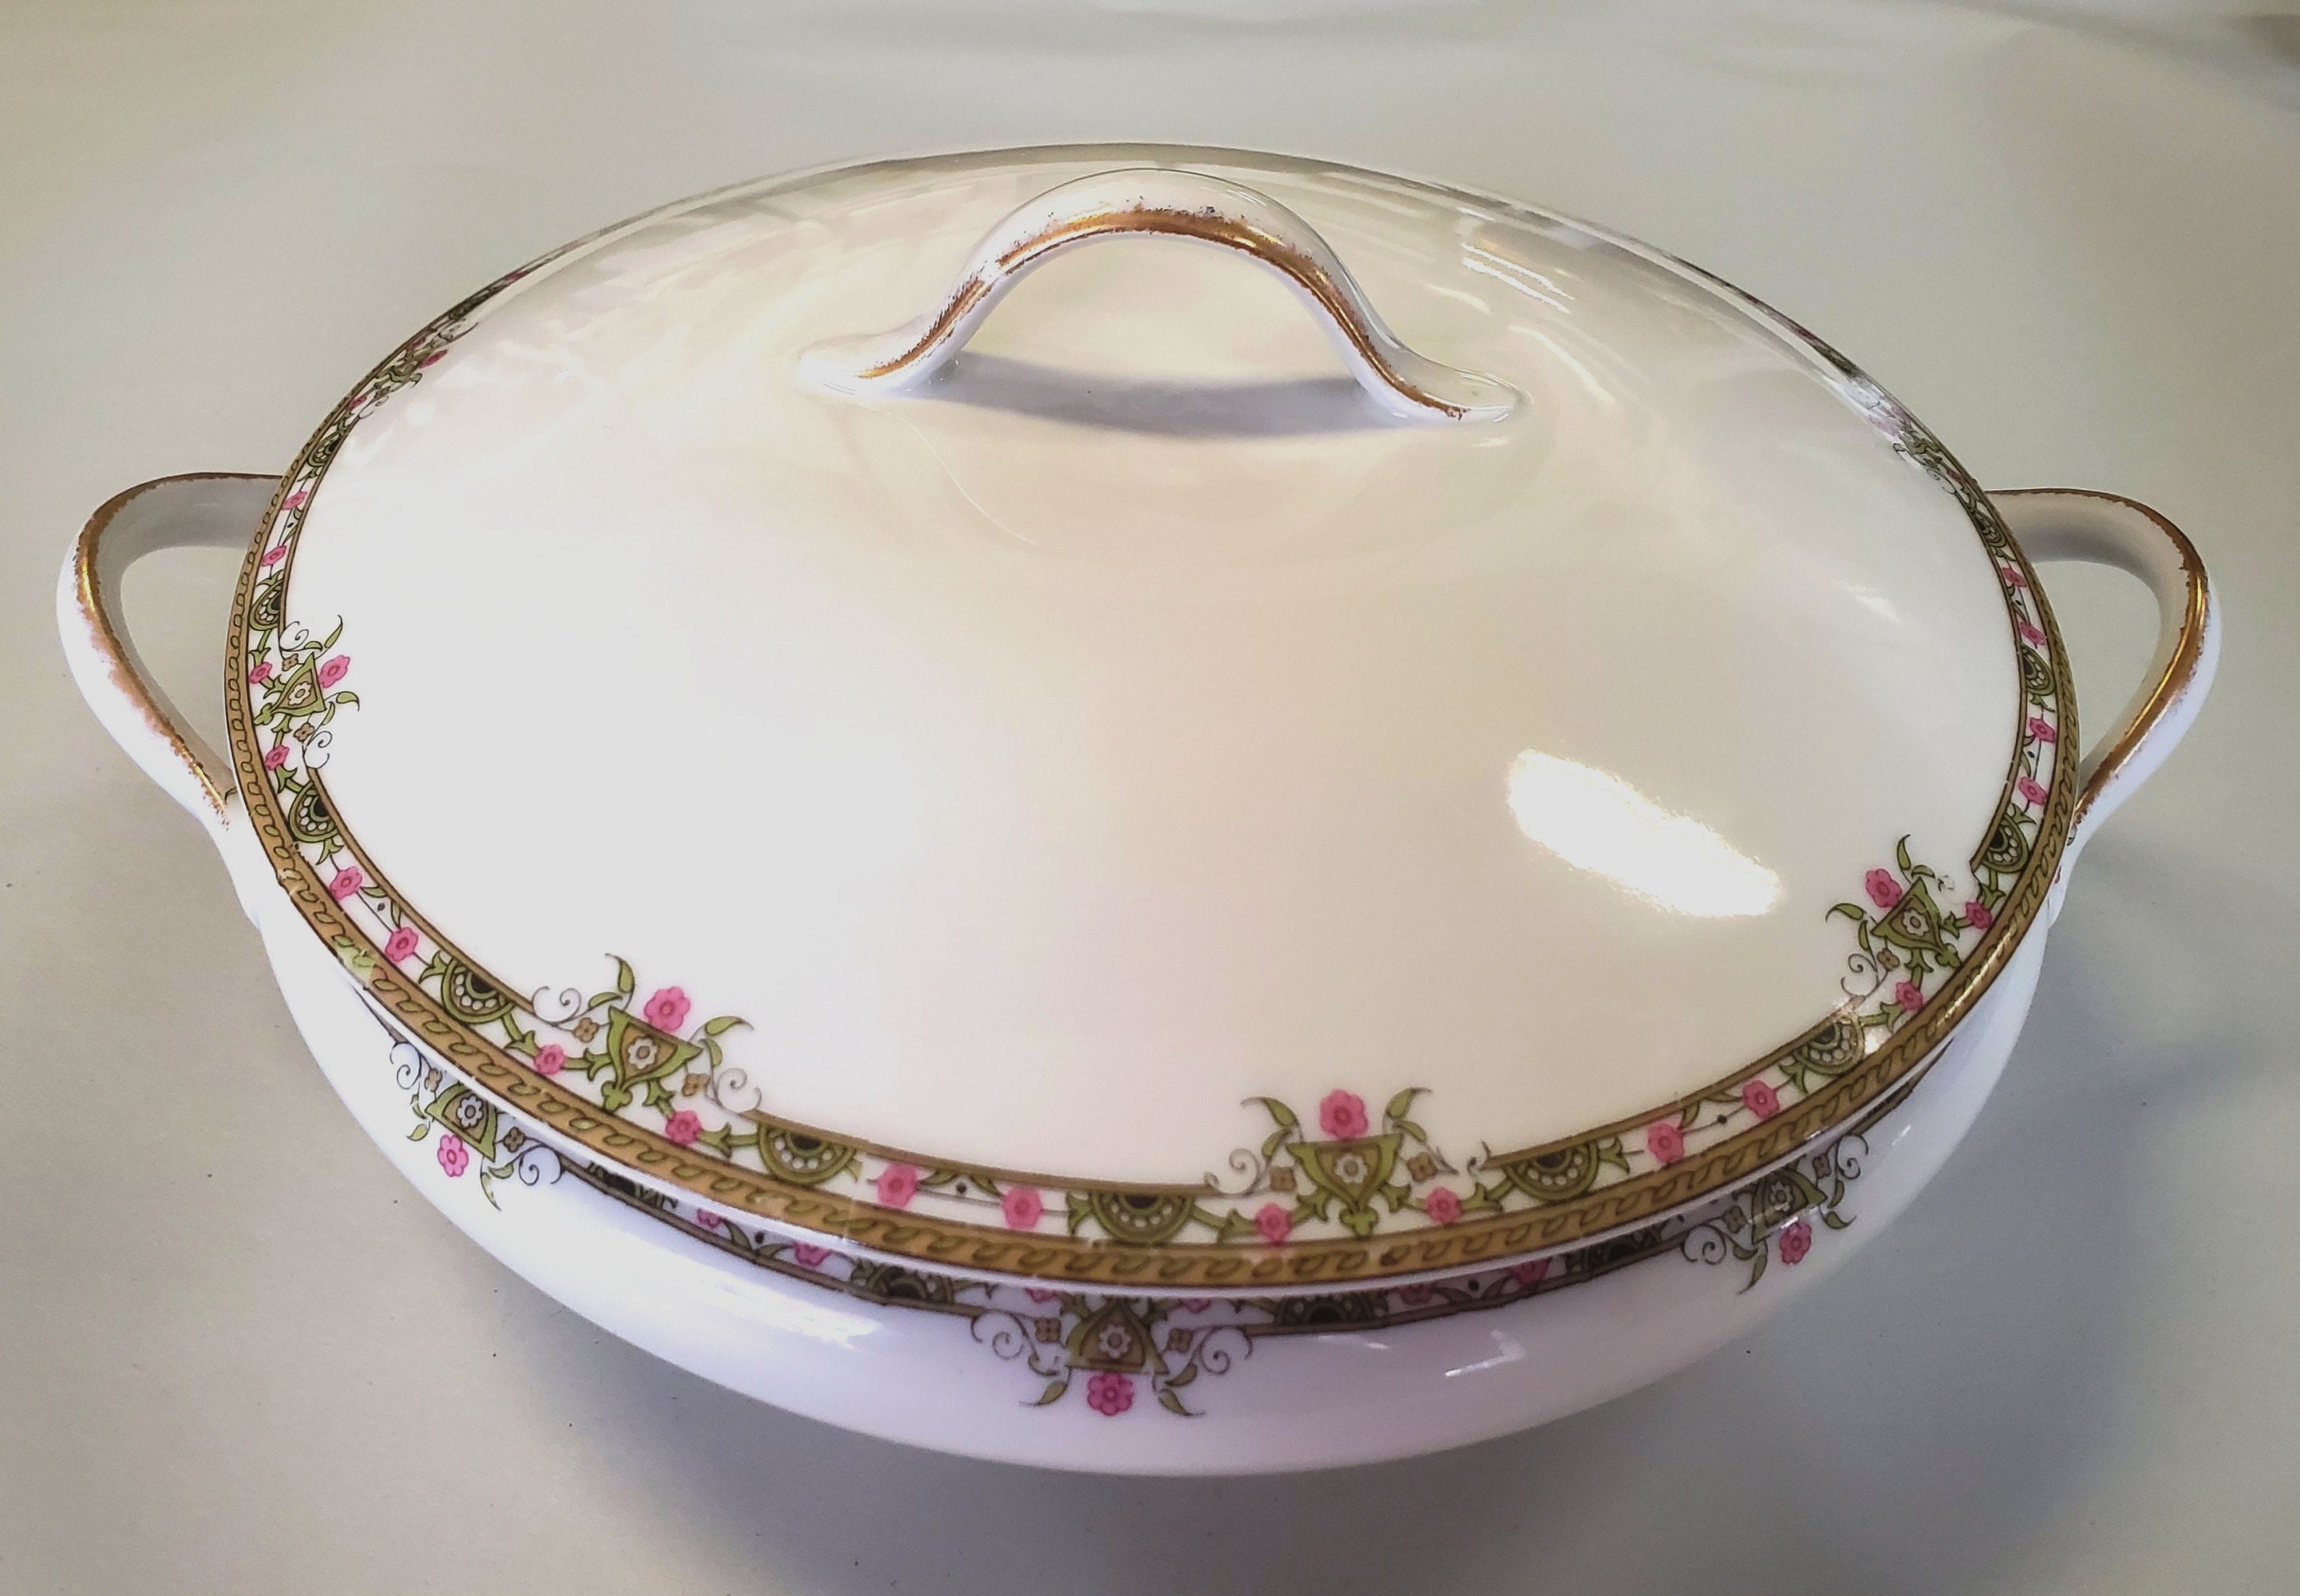 Antique Alfred Lanternier Limoges Covered Vegetable Dish & Tray with Floral  Dec.